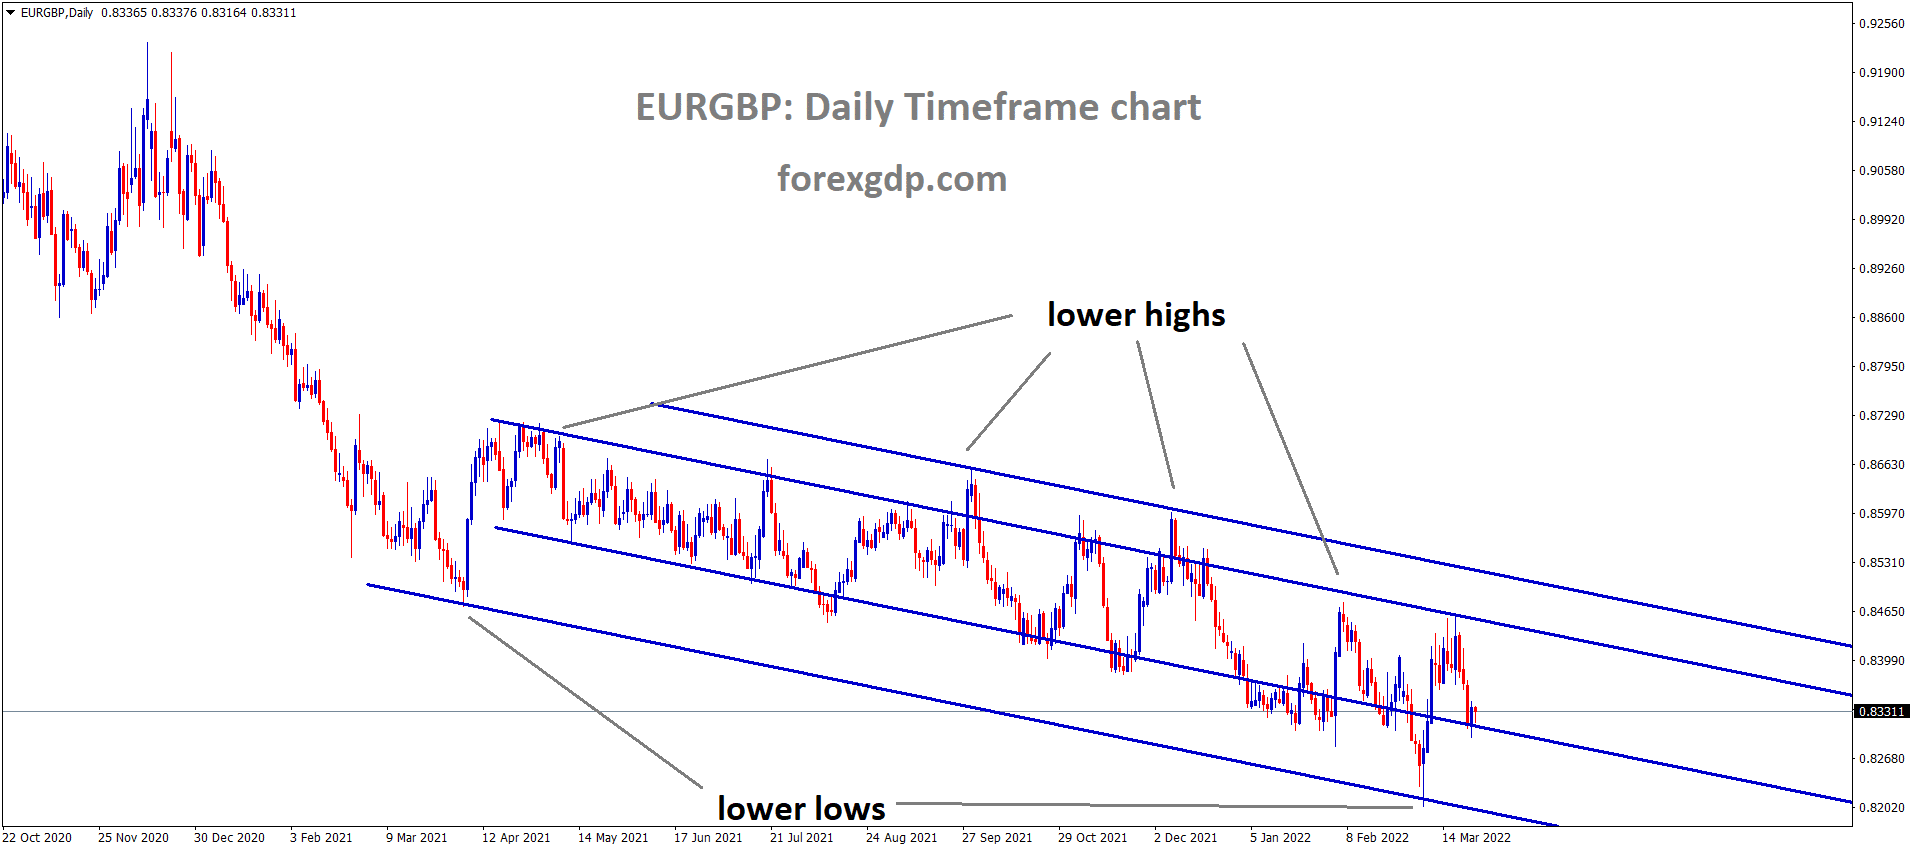 EURGBP D Market has rebounded from the lower low area of the minor channel of the Major Descending channel.